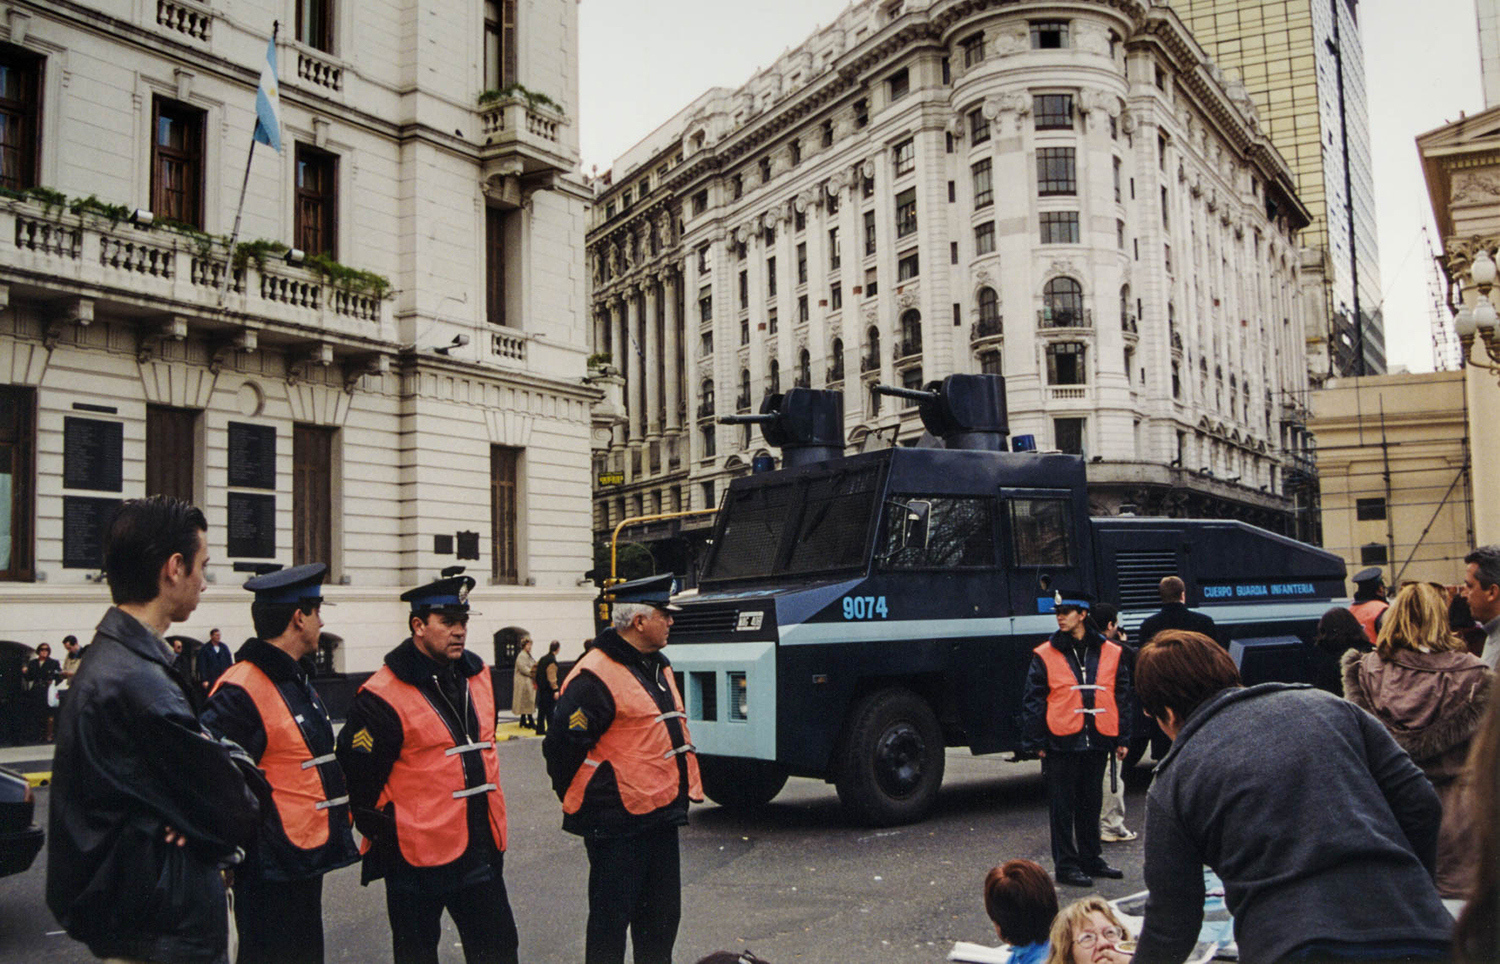 <p>Police forces watch over protests in Plaza de Mayo, with a water cannon at the ready. Demonstrators from the northern province of Corrientes had come to the centre of Argentine political power to protest corruption and deteriorating conditions. </p>